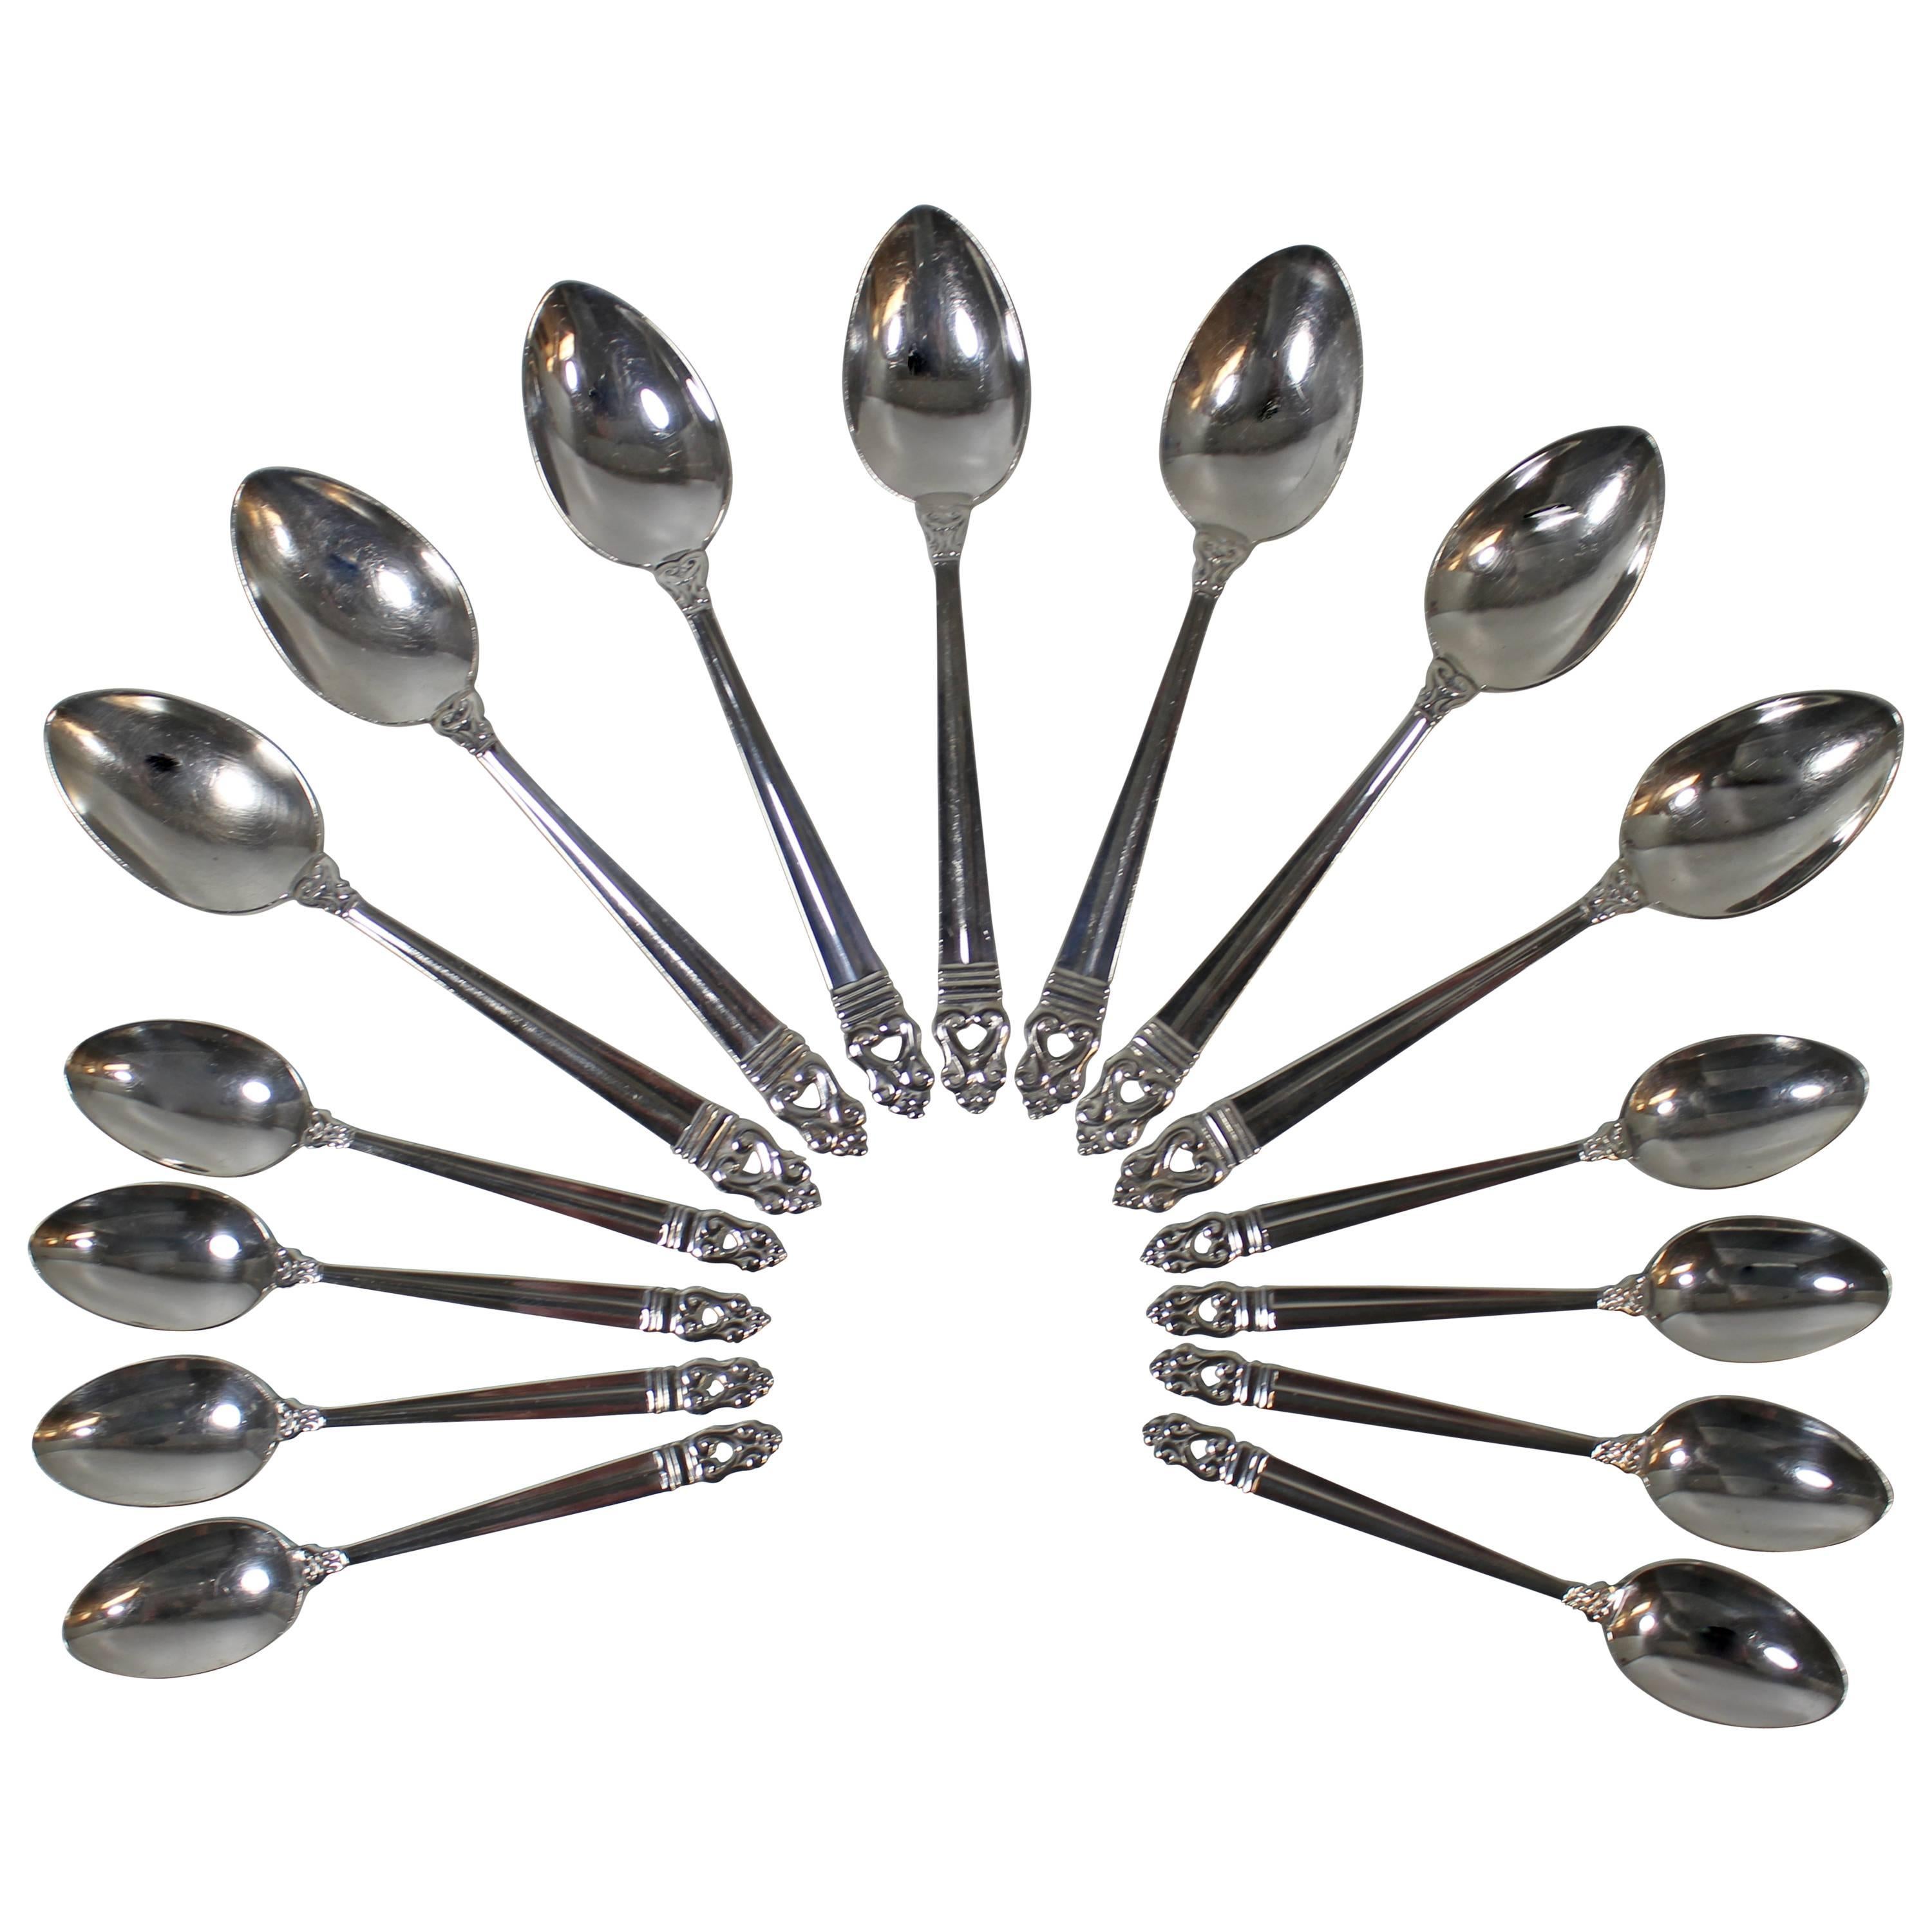 'Royal Danish' Sterling Silver Spoons by Alfred G. Kintz for International